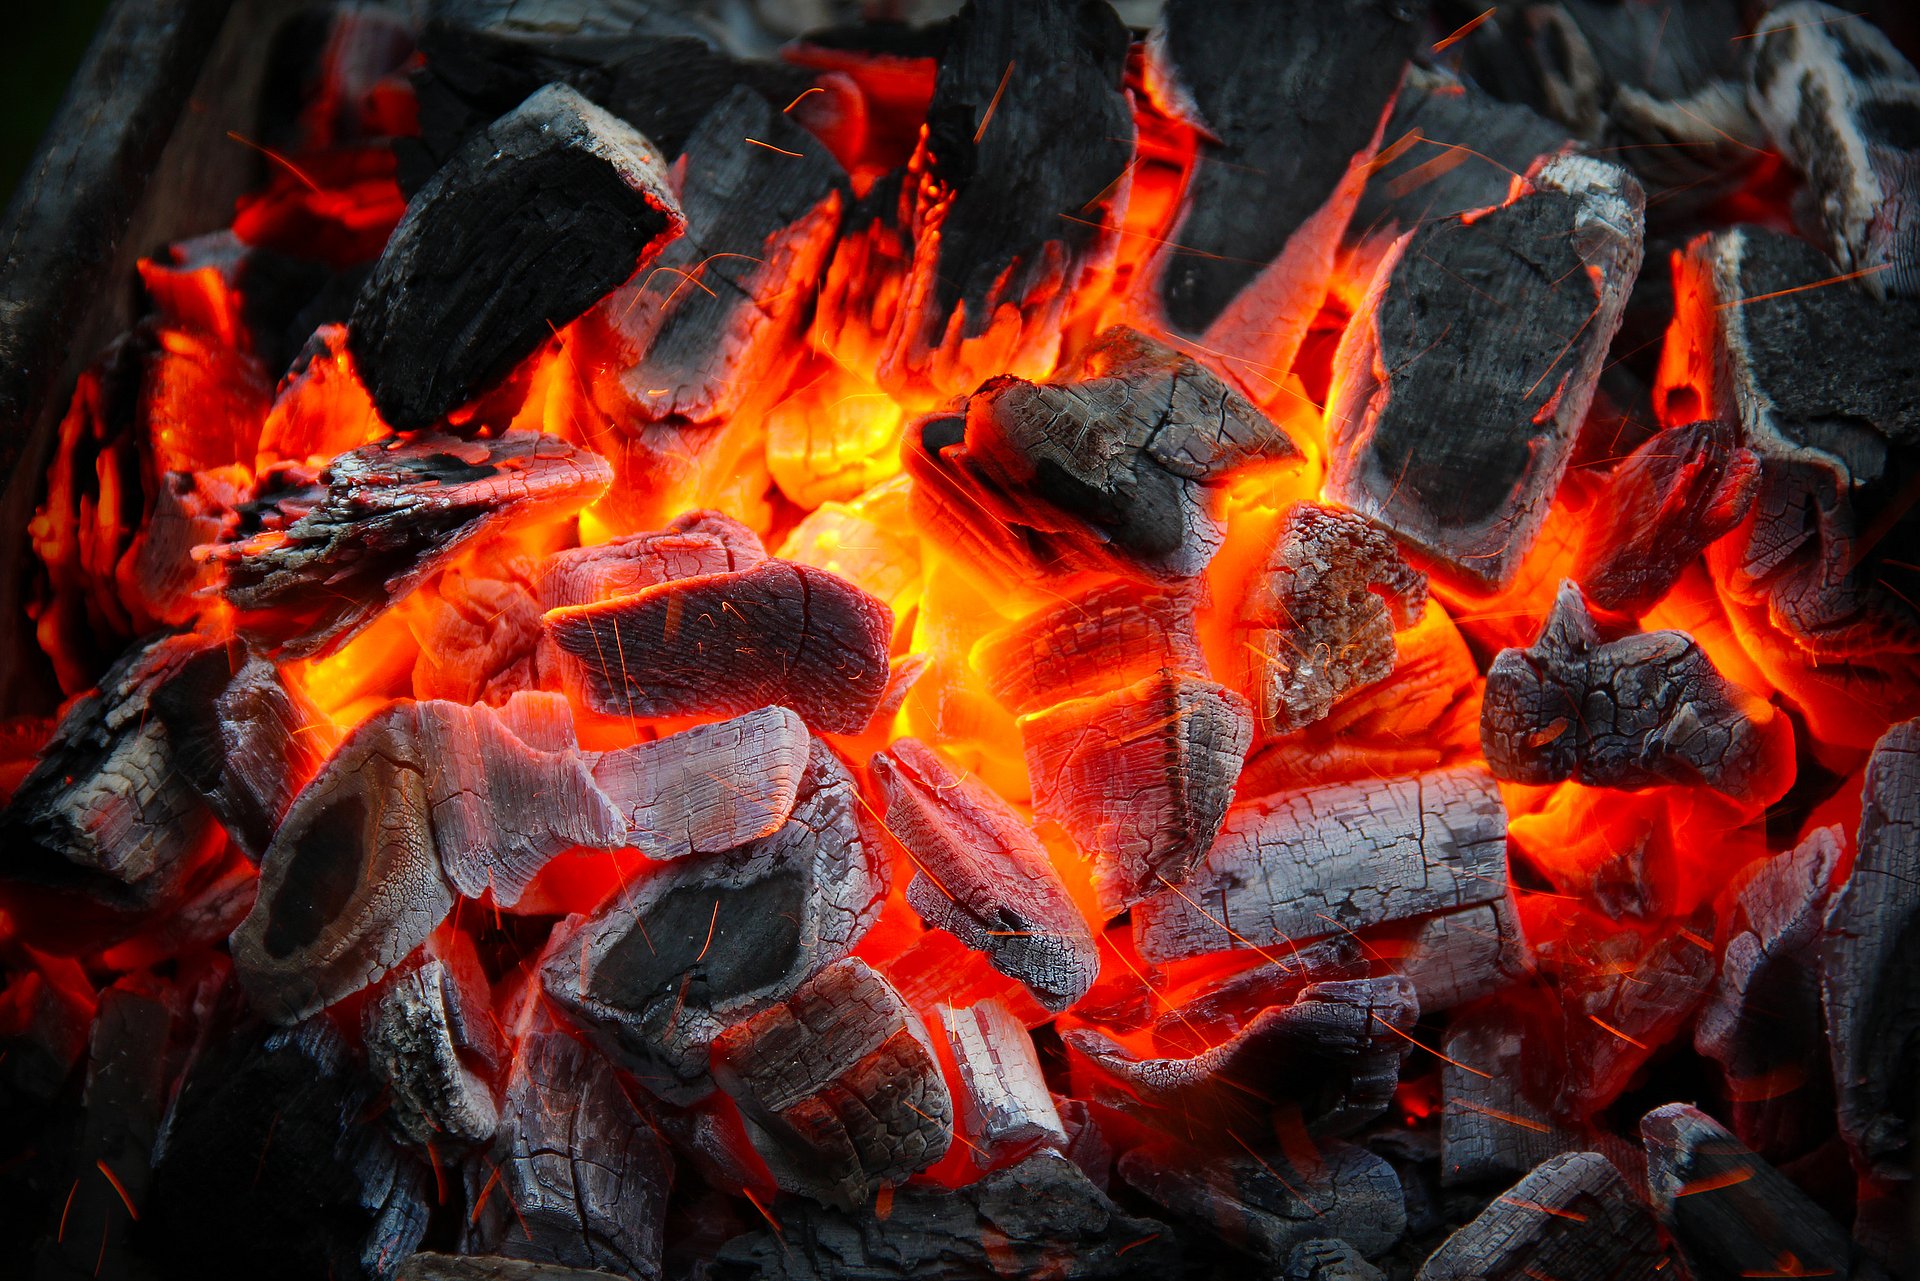 When fat reacts with glowing coal at a barbecue, a substance chemists call benzopyrene is created. It is a widespread environmental toxin that can cause cancer in humans.  (Photo: Fotolia/Dederer)